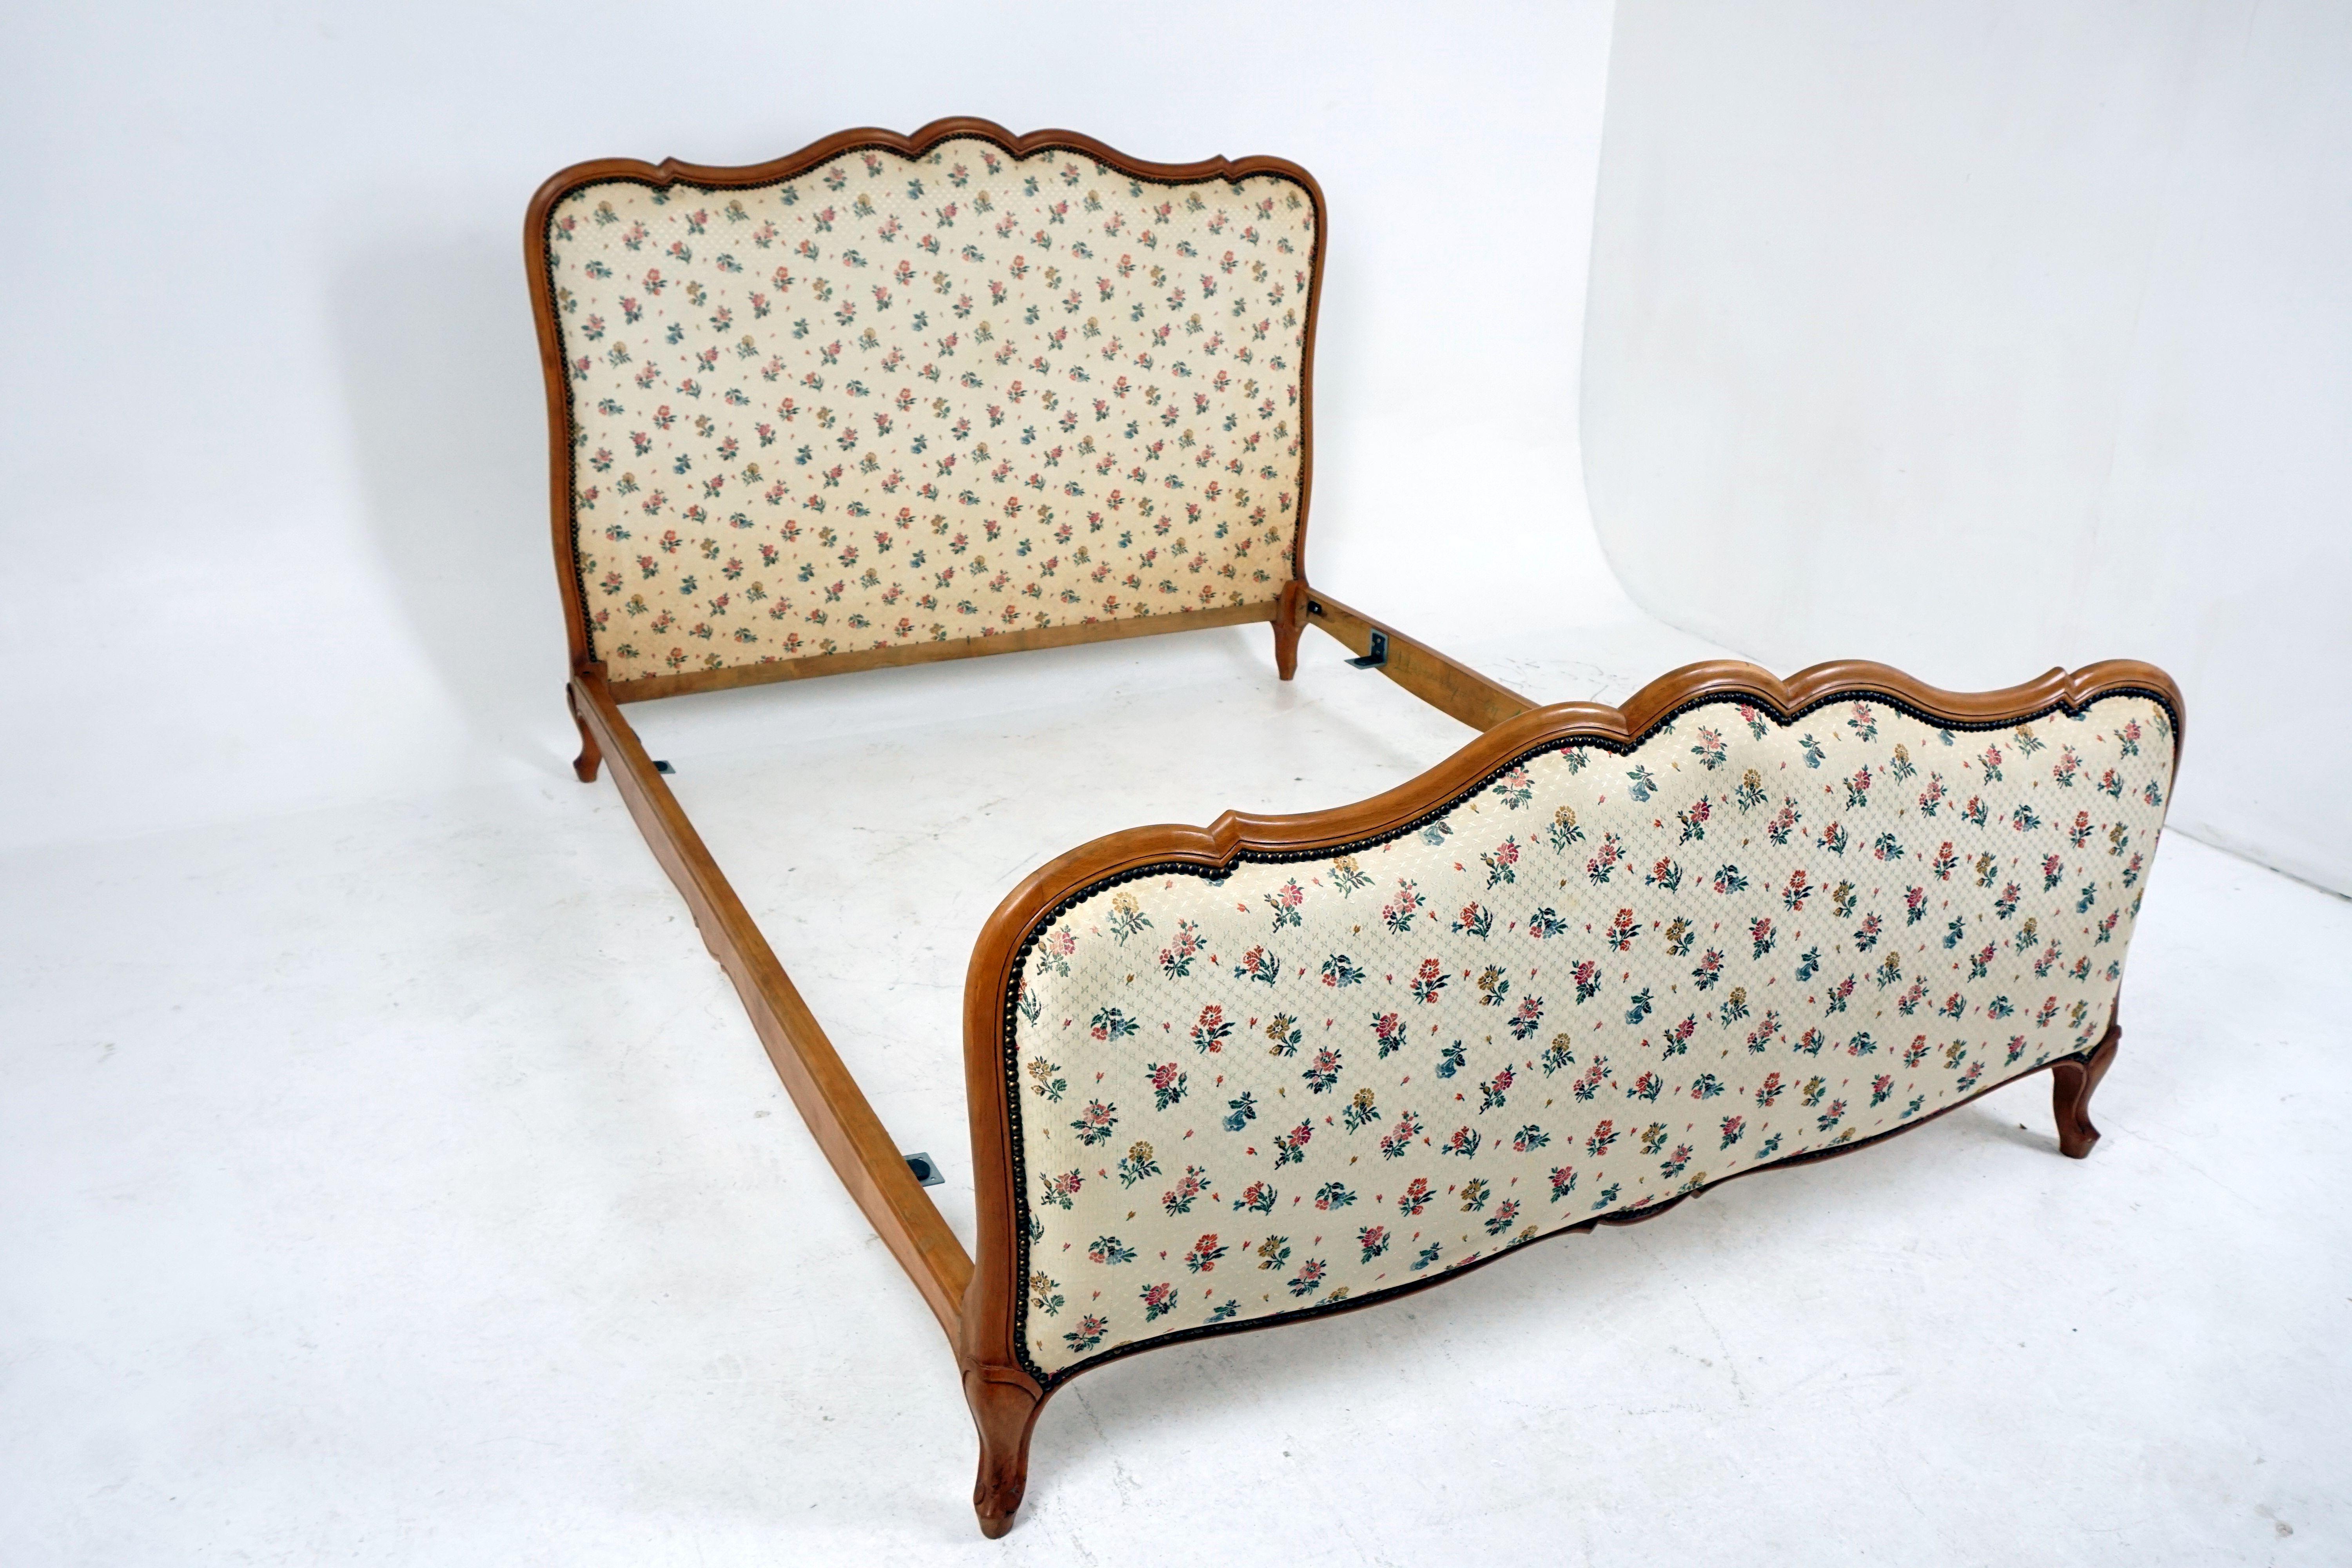 Vintage bed frame, Walnut, double size bed, Belgium 1930, B2542

Belgium, 1880
Solid Walnut
Original finish
Tall shaped headboard
Floral upholstery to the back
Shaped foot board with outside upholstery
Comes with original wooden side rails
Floral